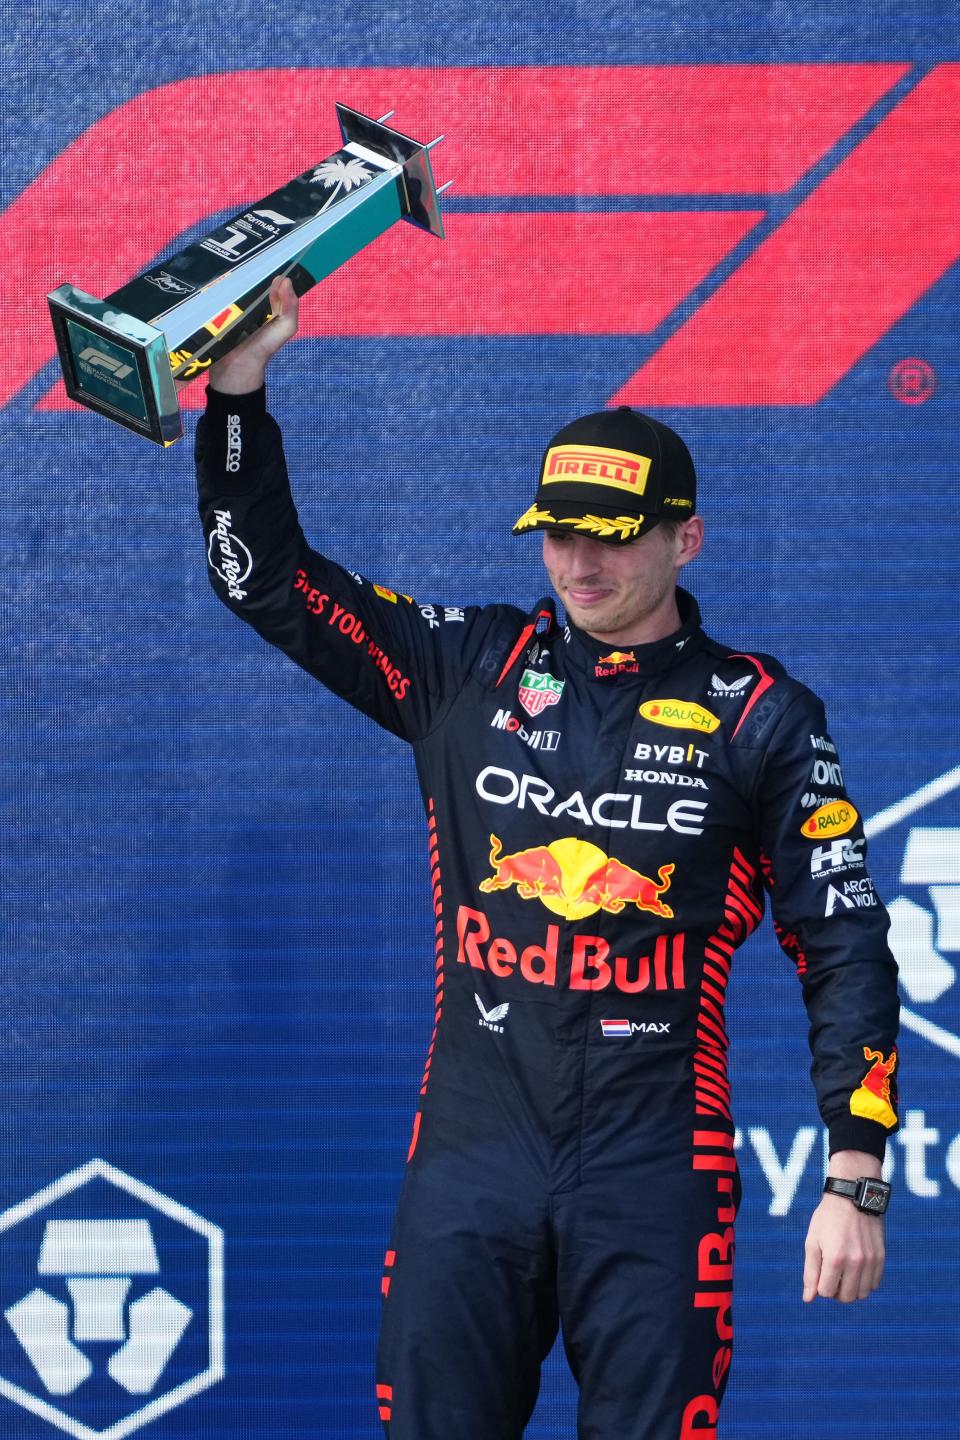 Red Bull driver Max Verstappen (1) of the Netherlands celebrates after winning Sunday's Miami Grand Prix at Miami International Autodrome.